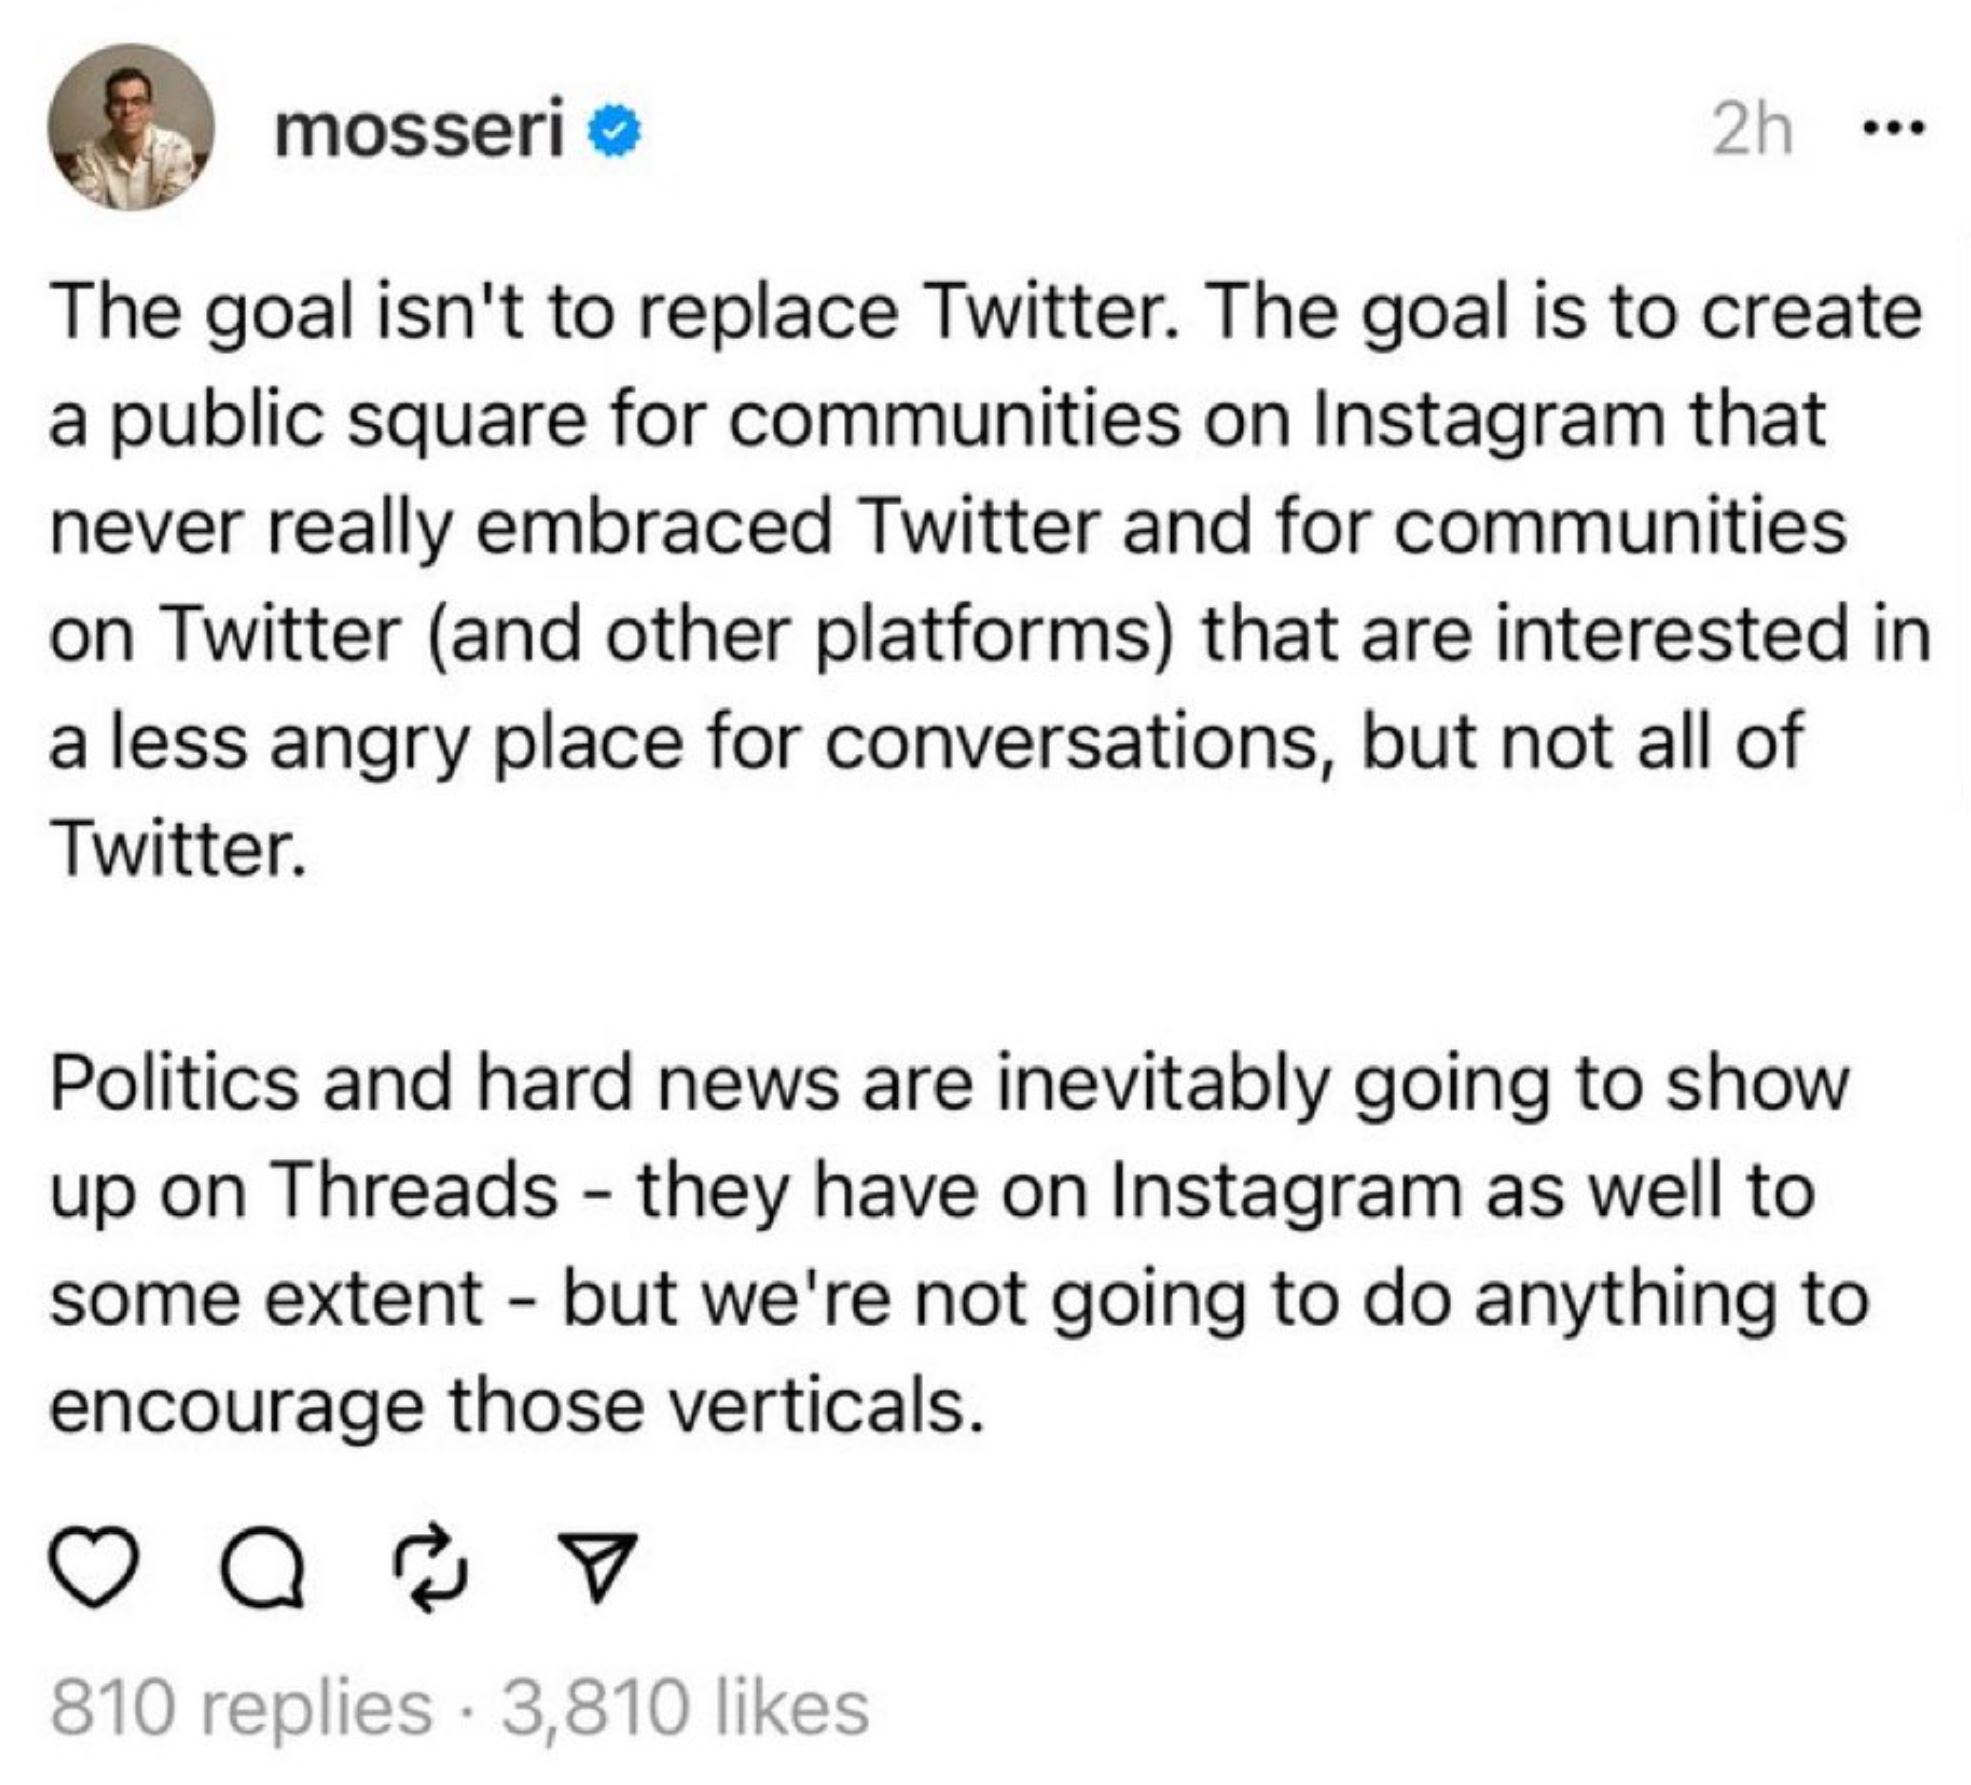 Tweet from @mosseri: The goal isn’t to replace Twitter. The goal is to create a public square for communities on Instagram that never really embraced Twitter and for the communities on Twitter (and other platforms) that are interested in a less angry place for conversations, but not all of Twitter. Politics and hard news are inevitably going to show up on Threads - they have on Instagram as well to some extent - but we’re not going to do anything to encourage those verticals.